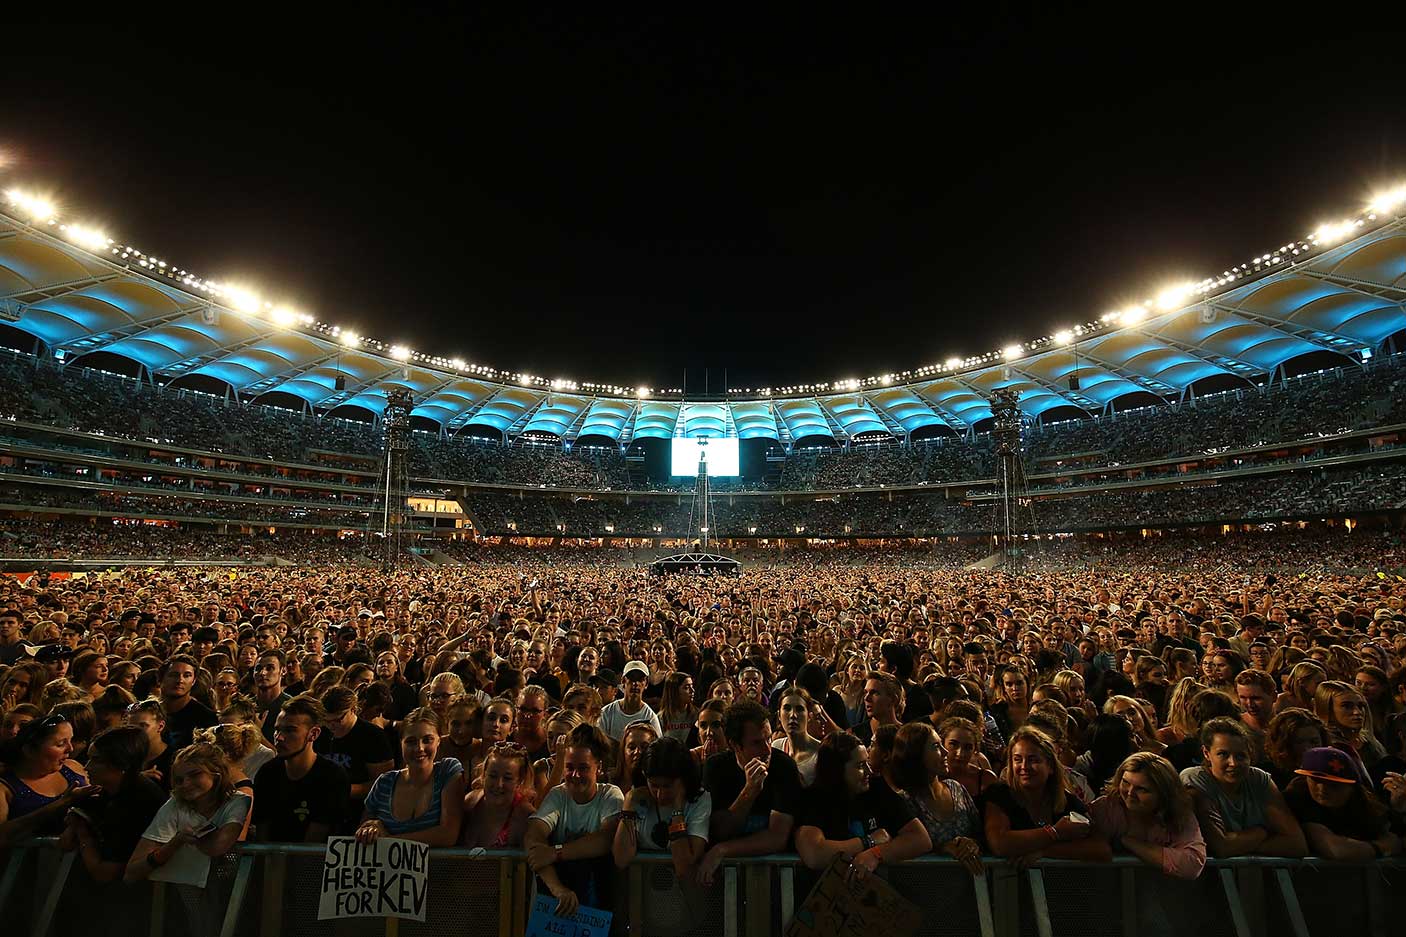 A crowd of concert-goers waiting for Ed Sheeran to perform at Optus Stadium in the evening.